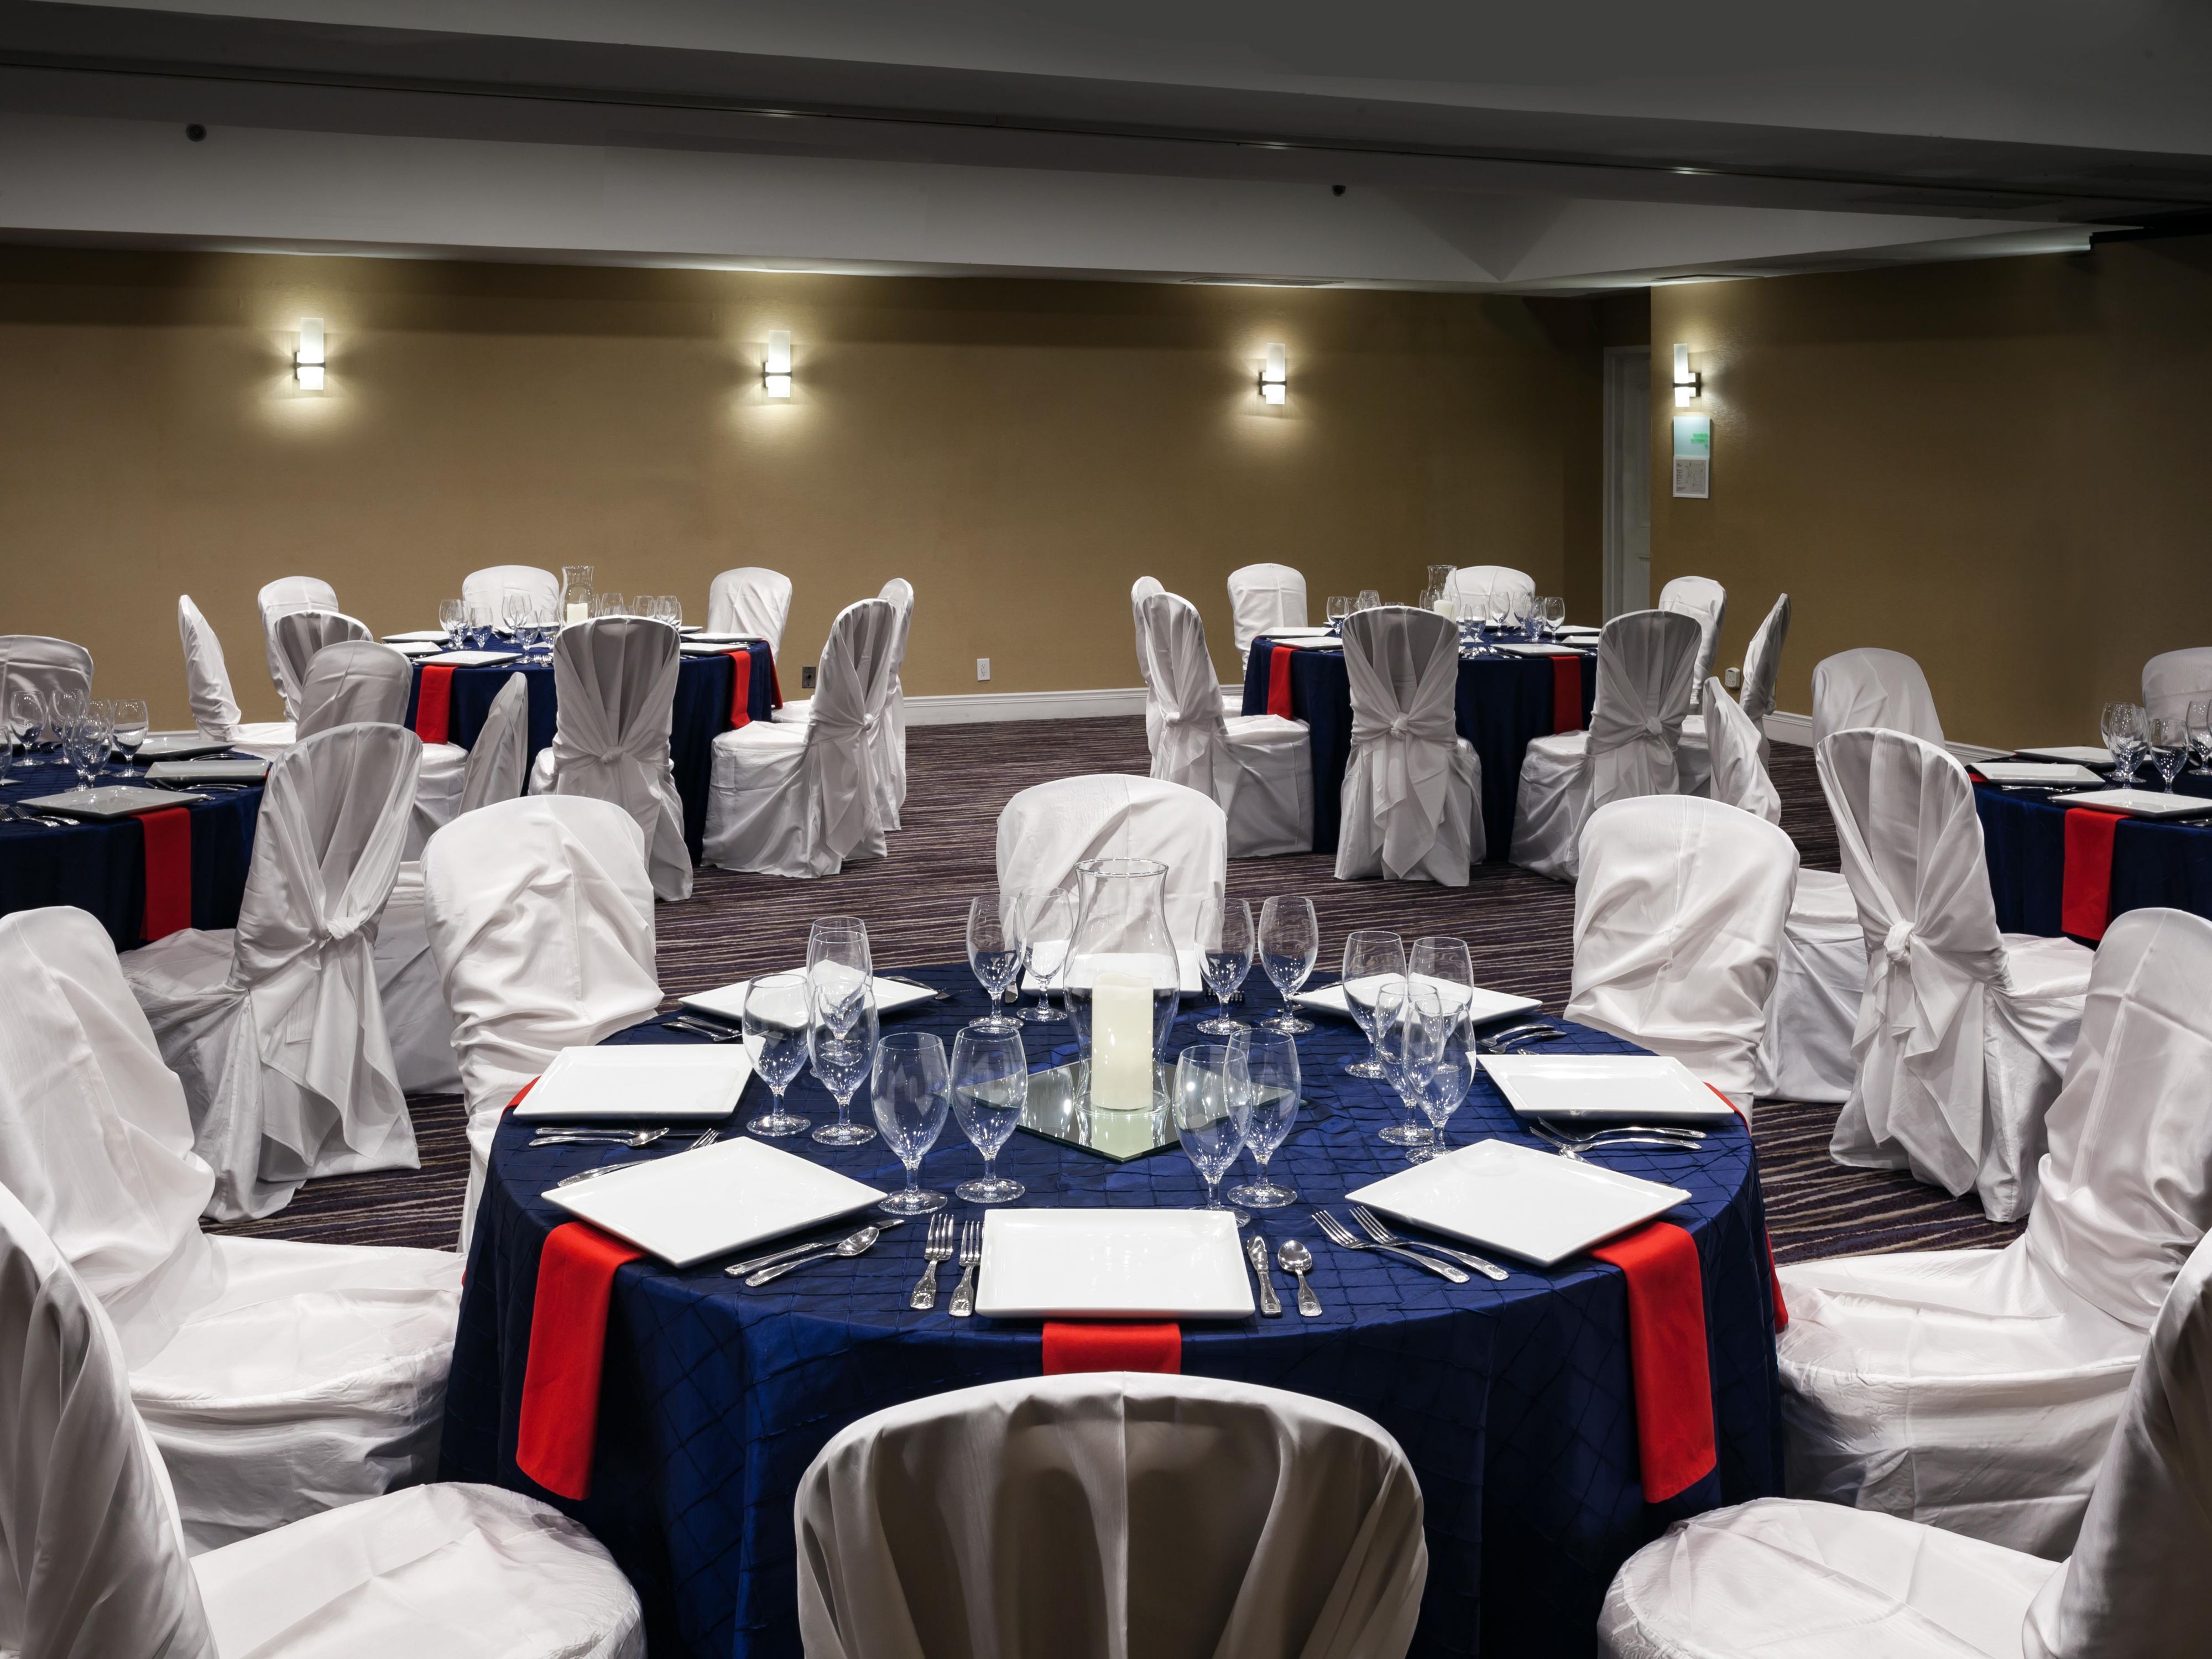 Our 4,000 square feet of function space offers the perfect setting for your social event or company meeting. The spaces allow for customization while our catering and banquet staff welcomes the opportunity to serve you.